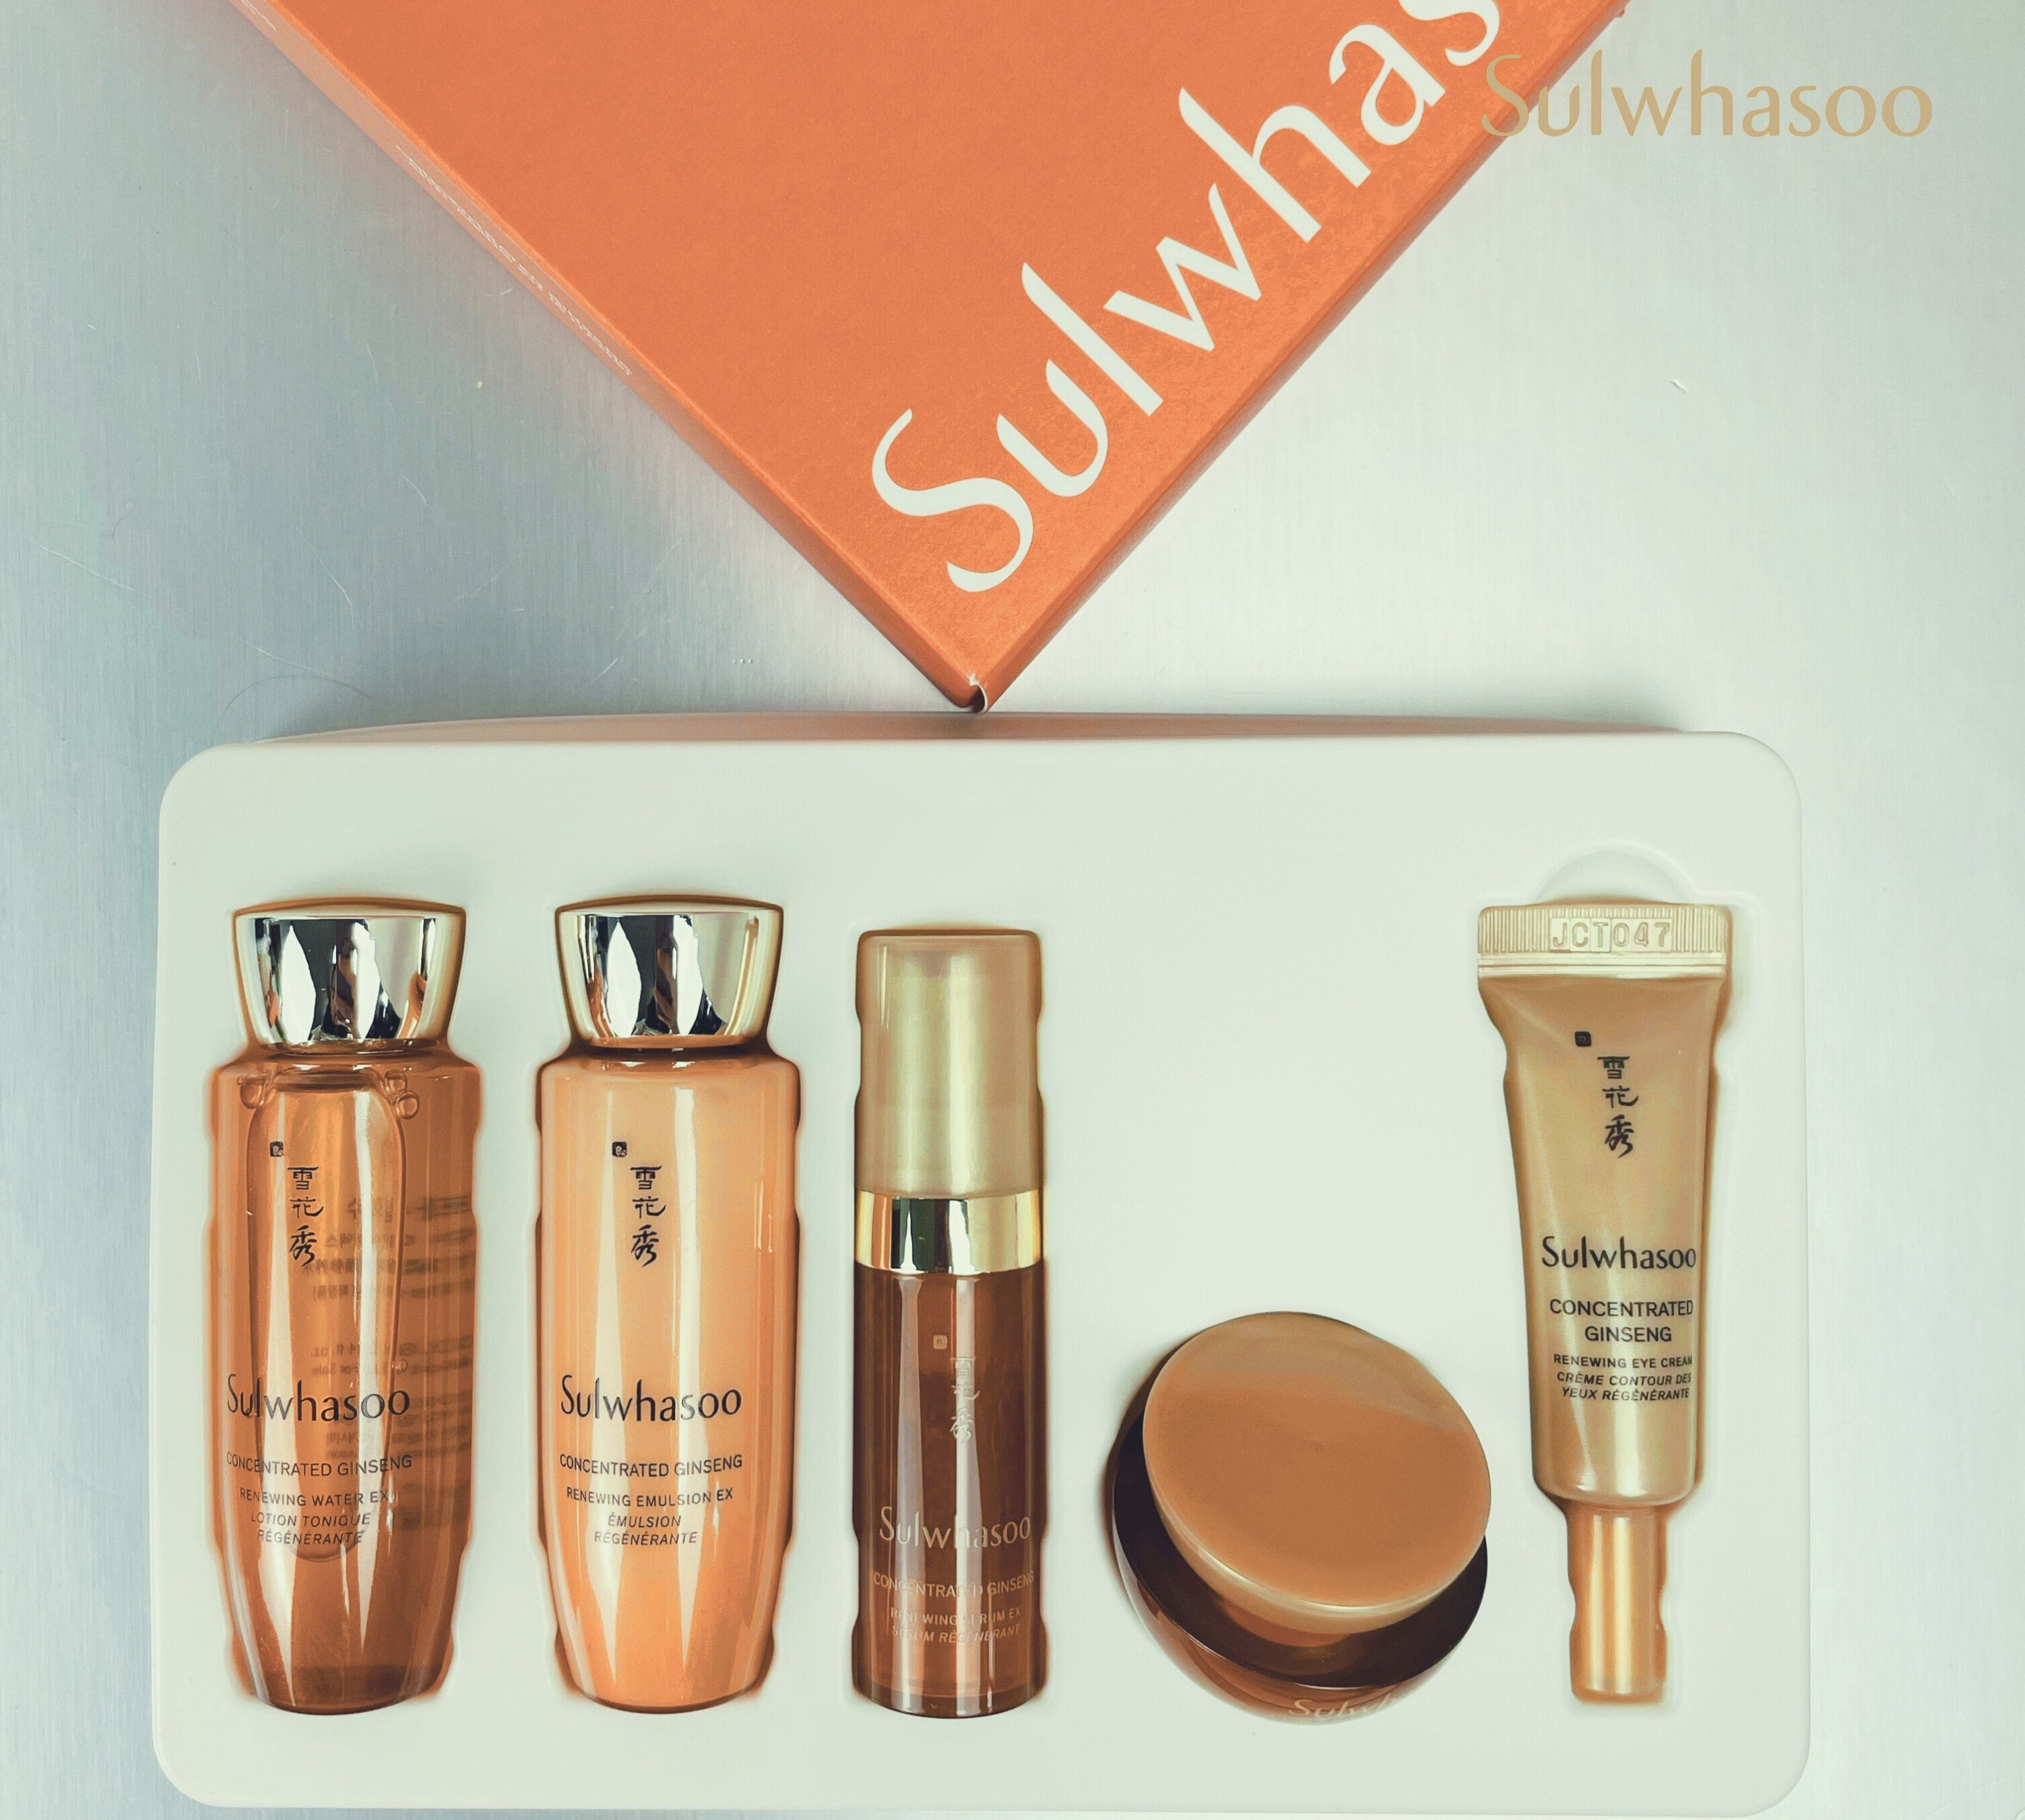 Sulwhasoo Concentrated Ginseng Anti-aging Kits 5 items Korean Beauty